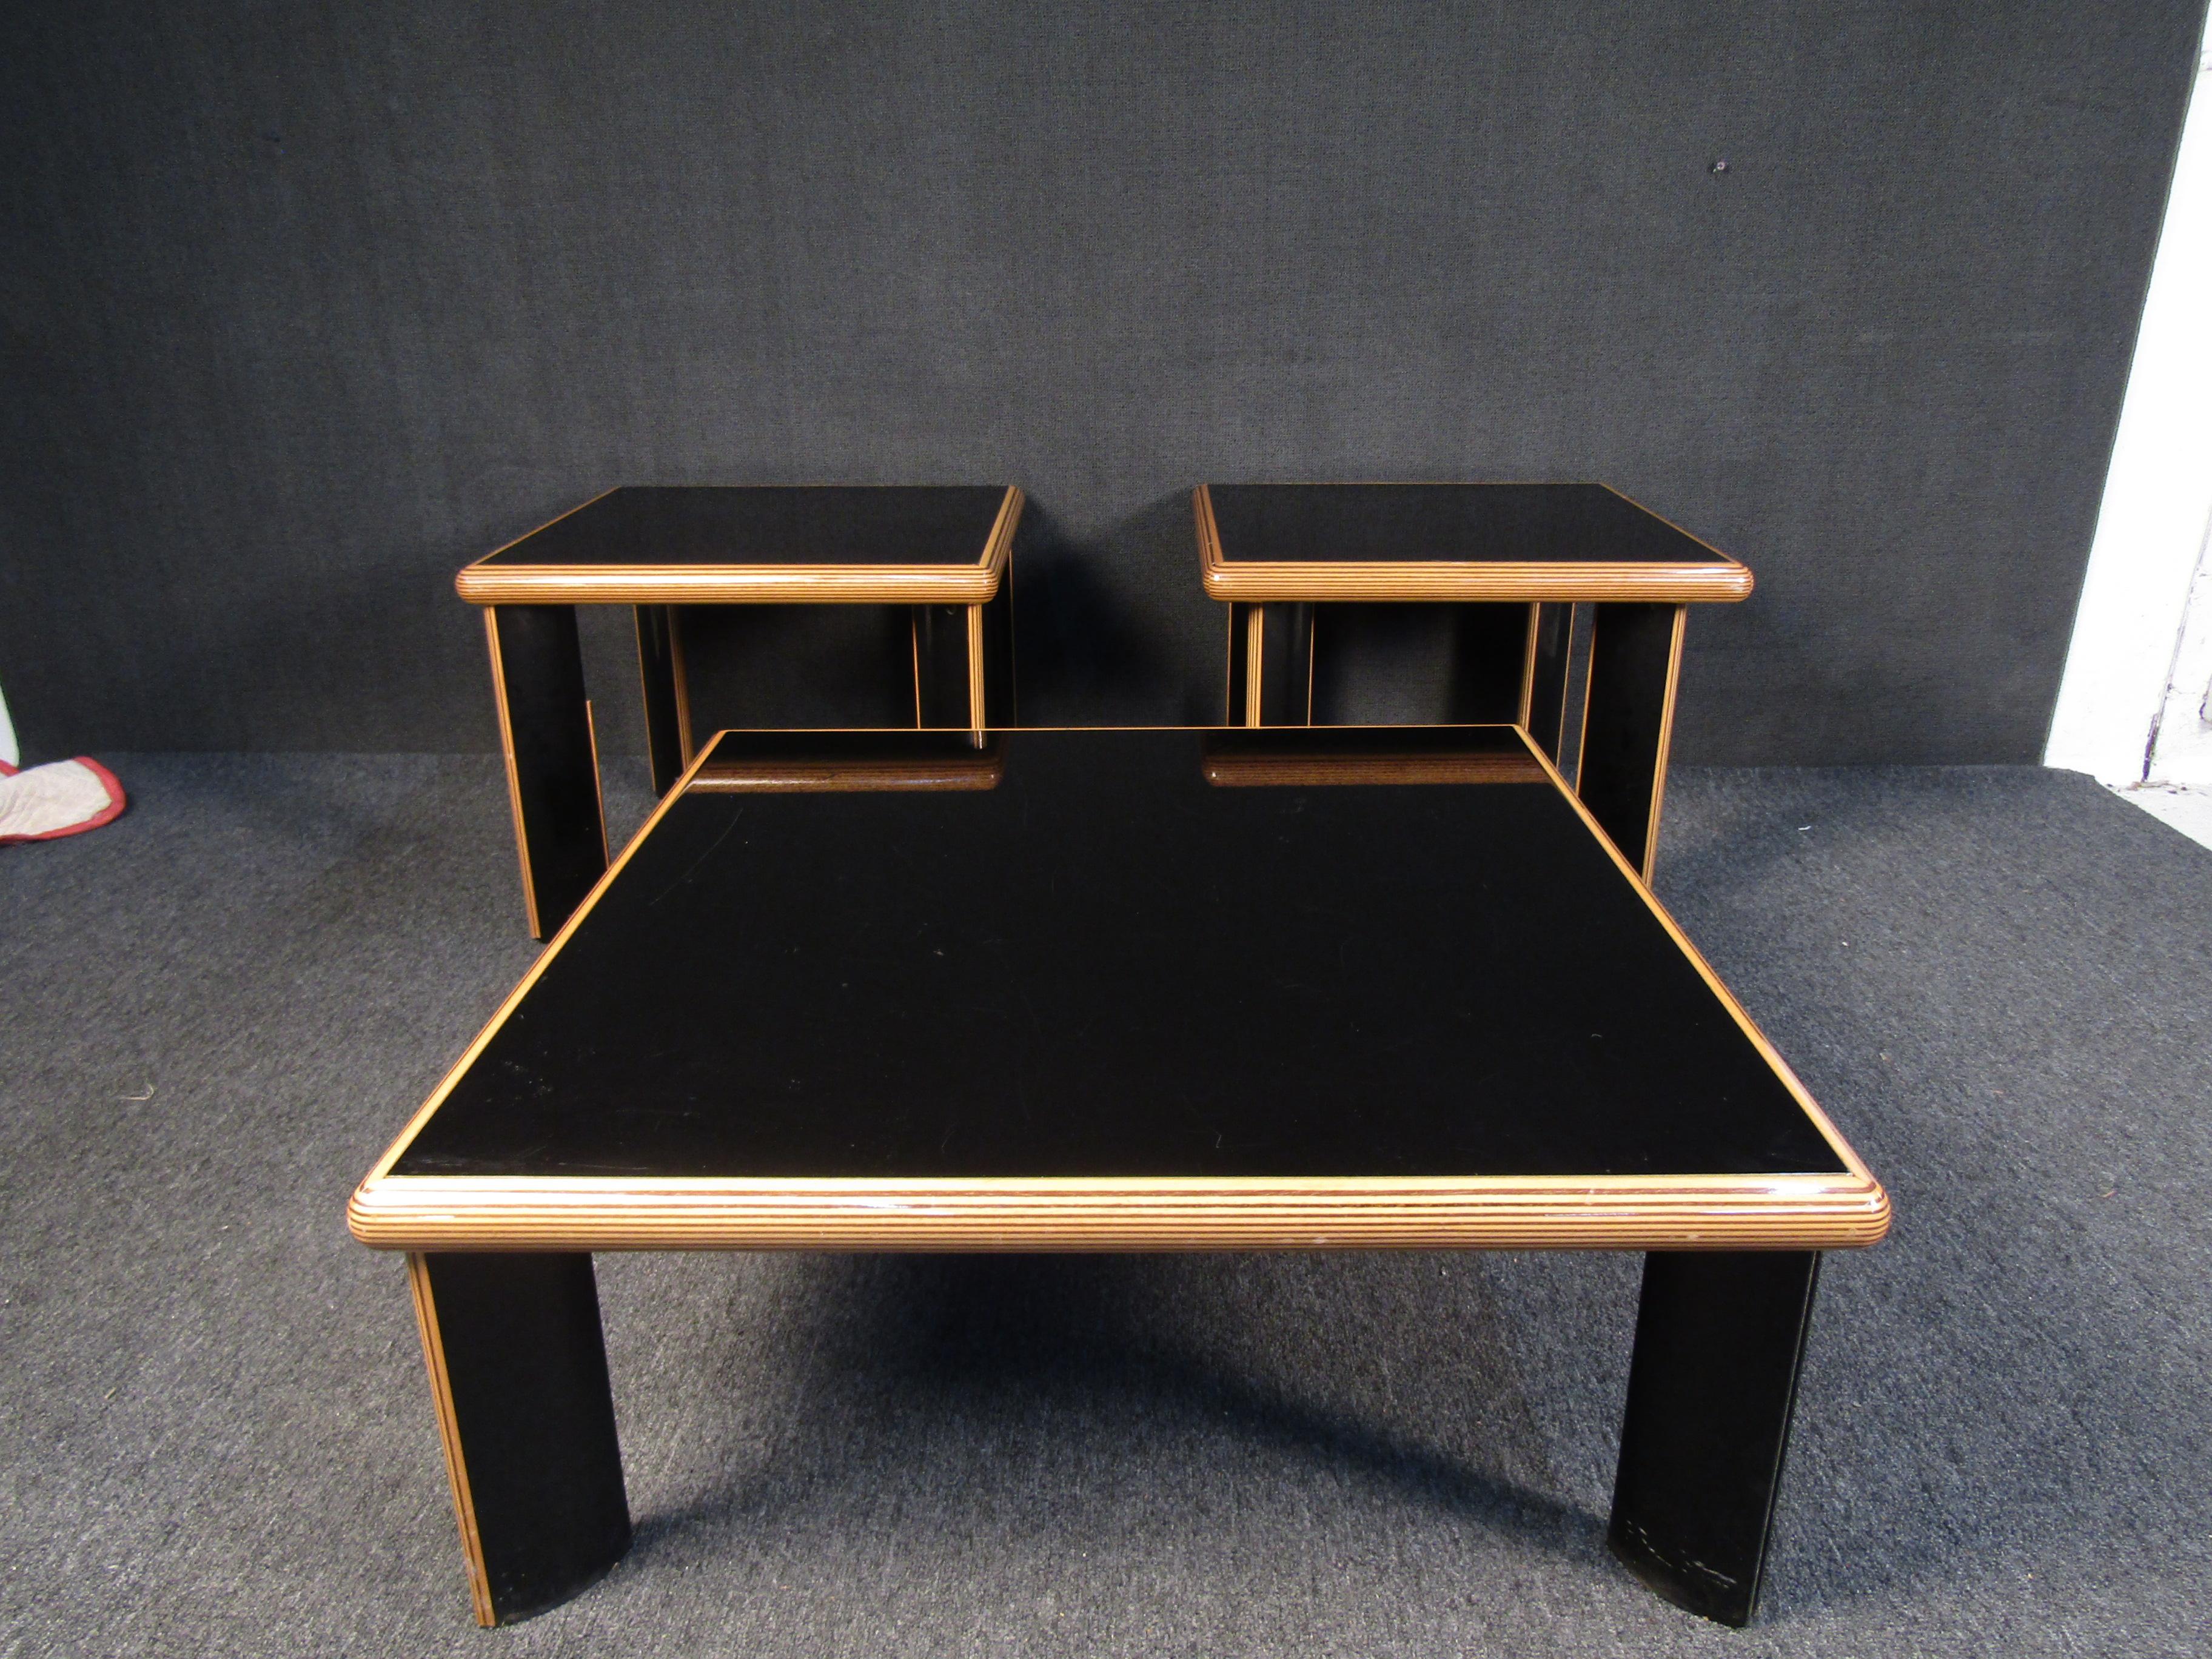 With an elegant black finish and light wooden accents, this set of one coffee table and two side tables is sleek and impressive. Please confirm item location with seller (NY/NJ).

Dimensions-
Coffee table: 38 W x 38 D x 15 H
Side table: 27 W x